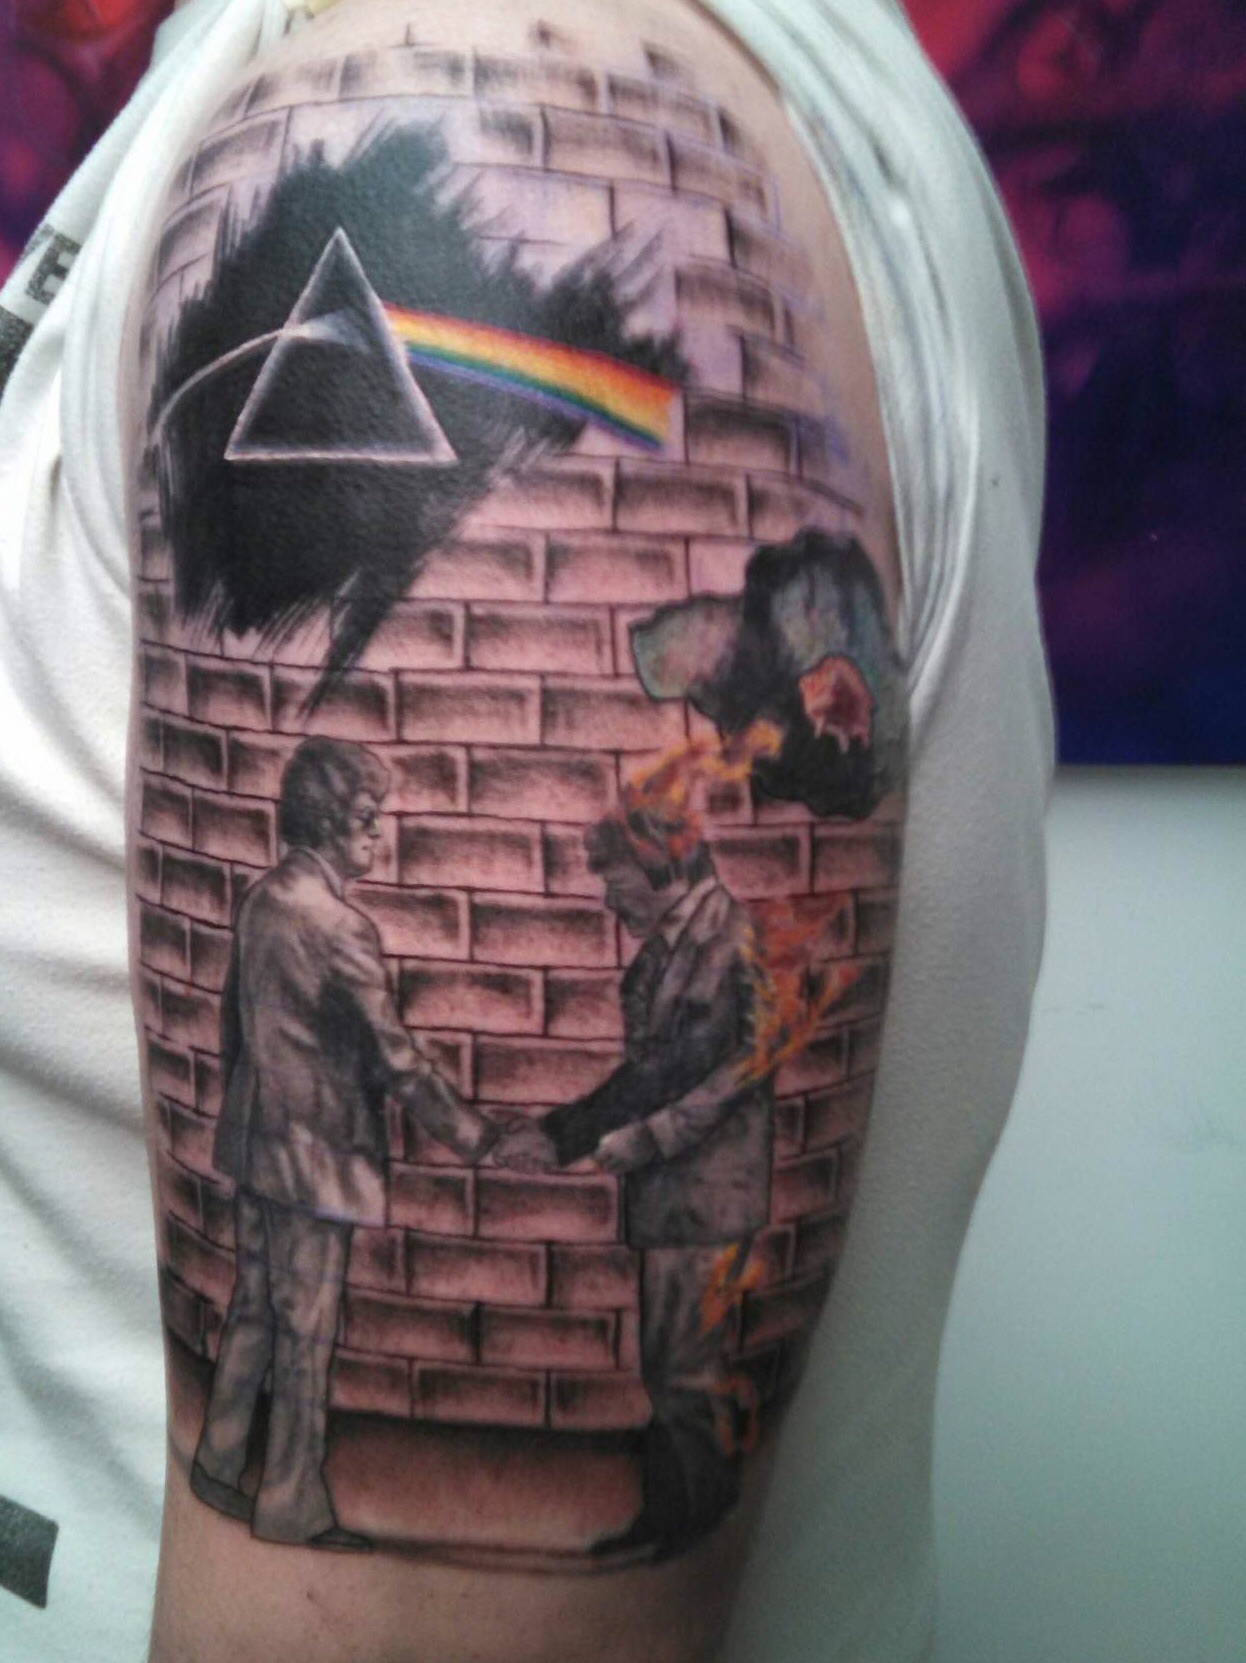 Pink Floyd mash up basically finished by Dominick Cali at Michael